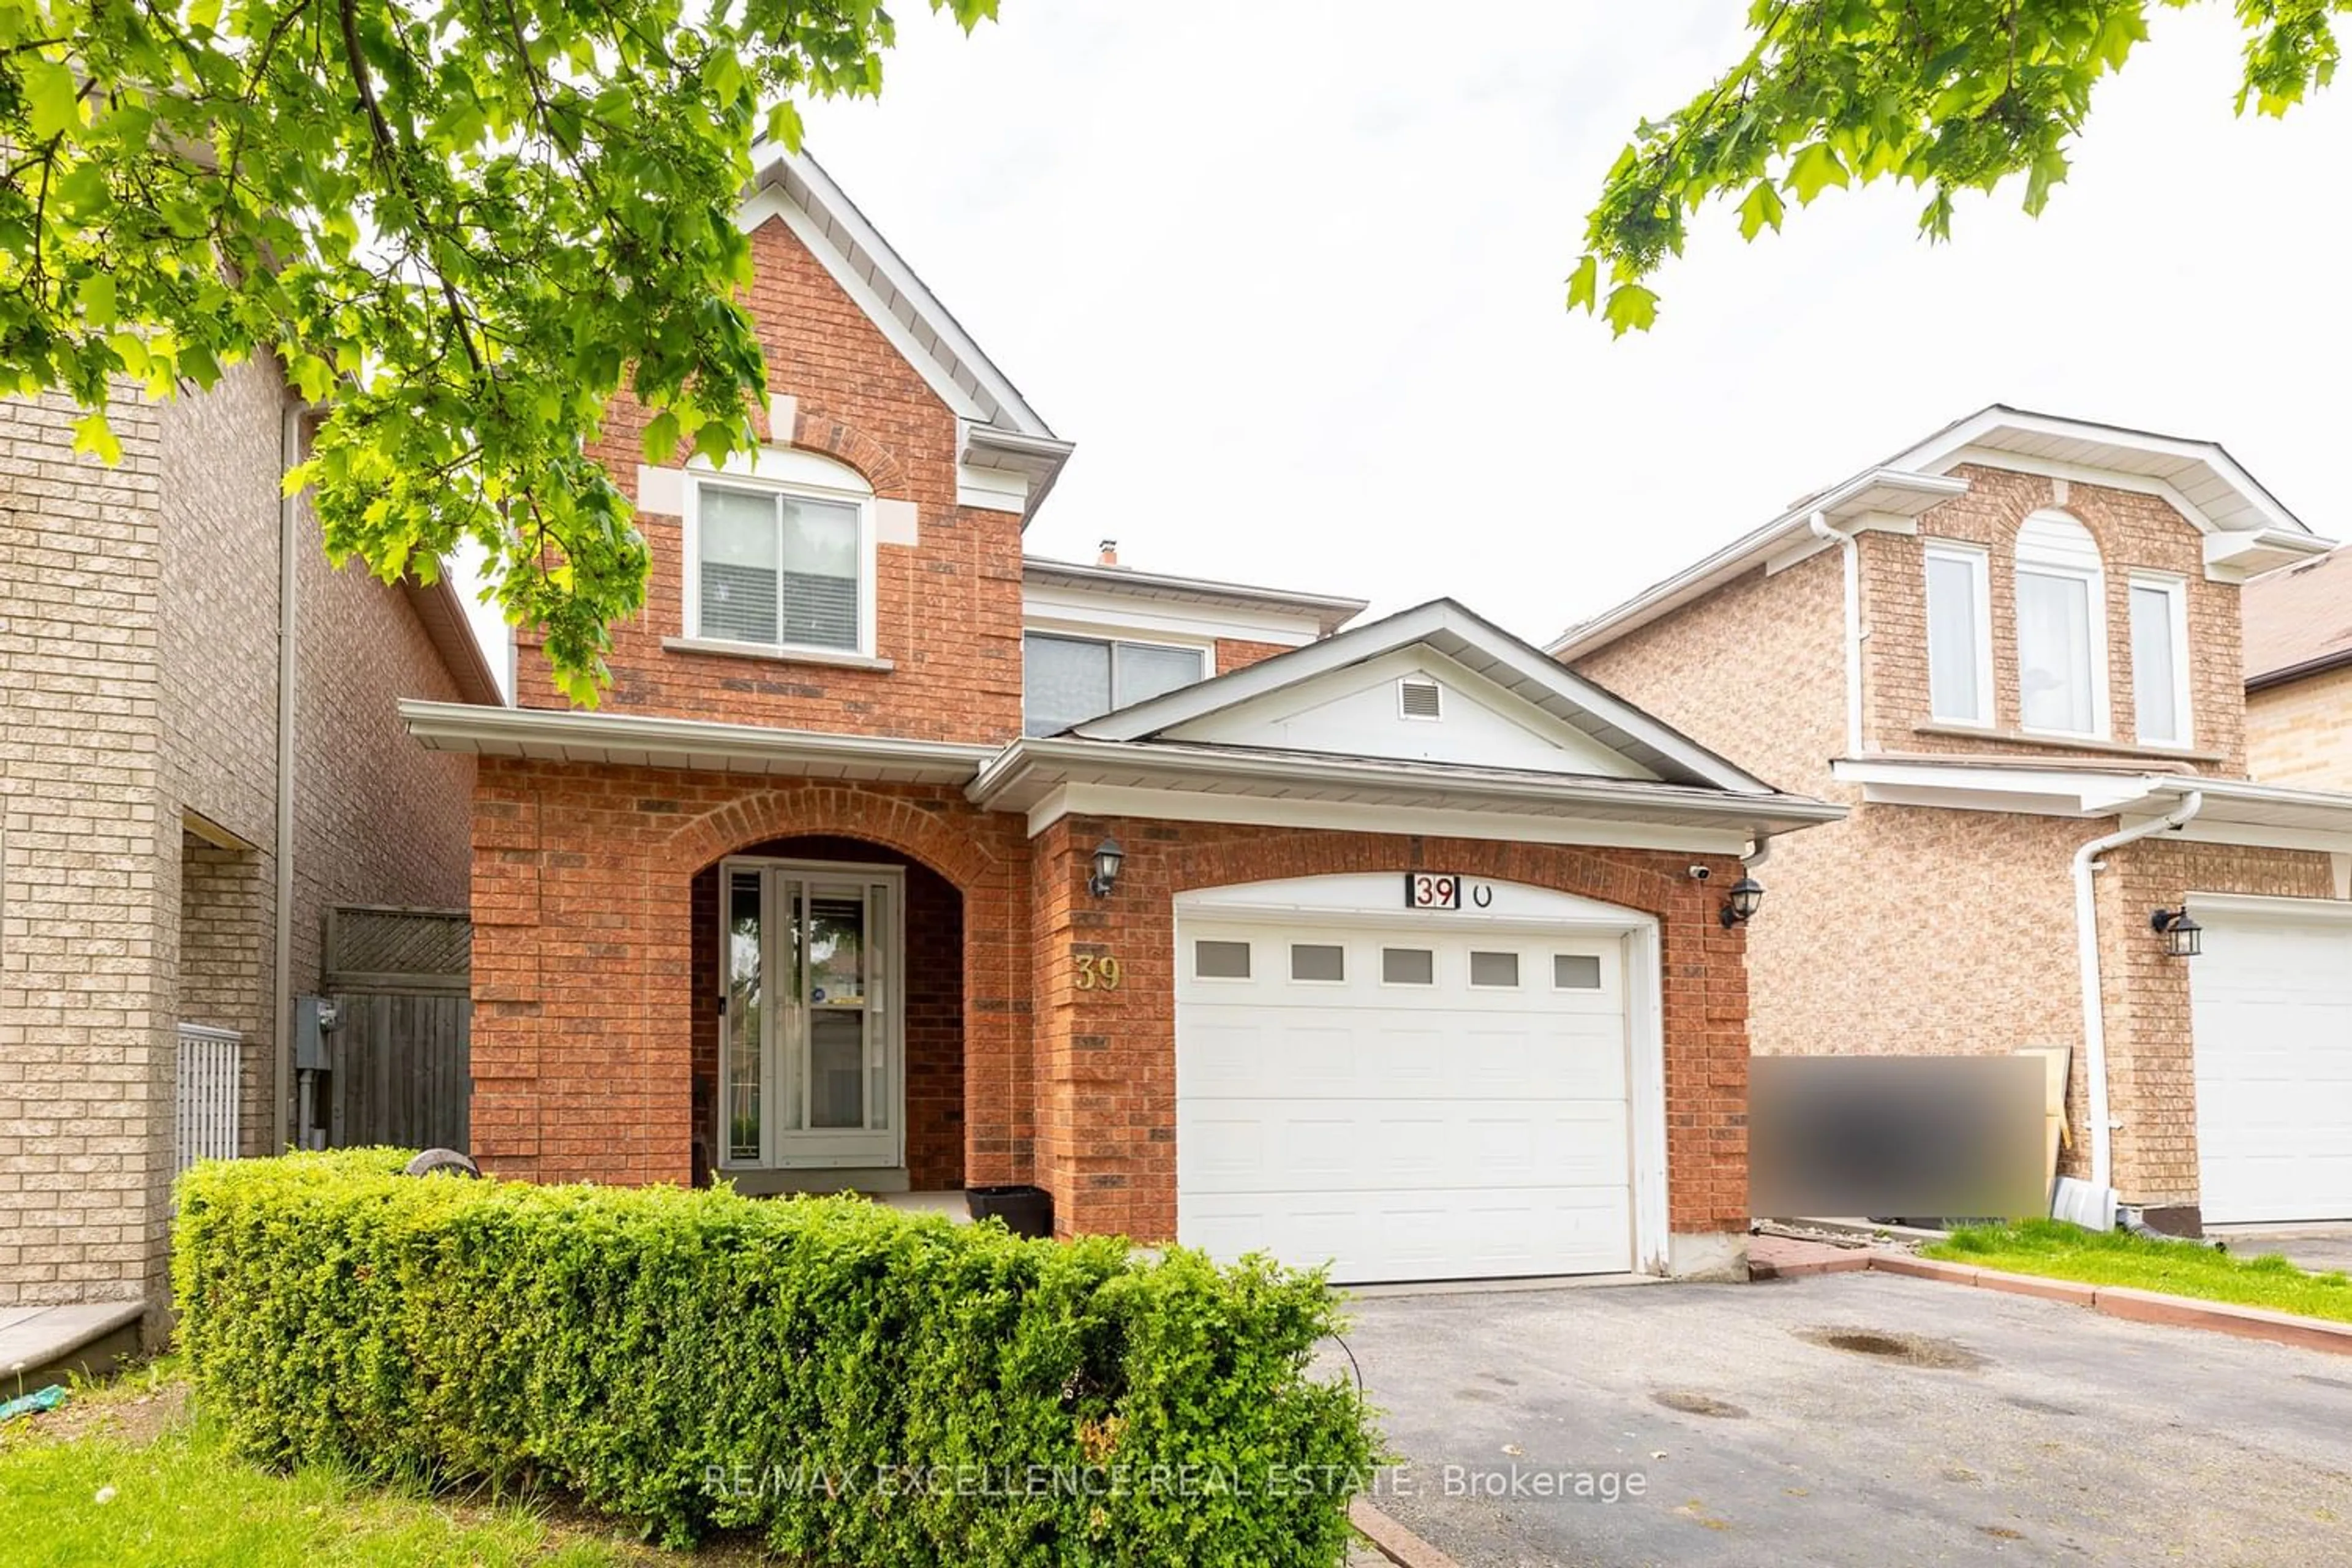 Home with brick exterior material for 39 Horned Owl Dr, Brampton Ontario L6R 1C6